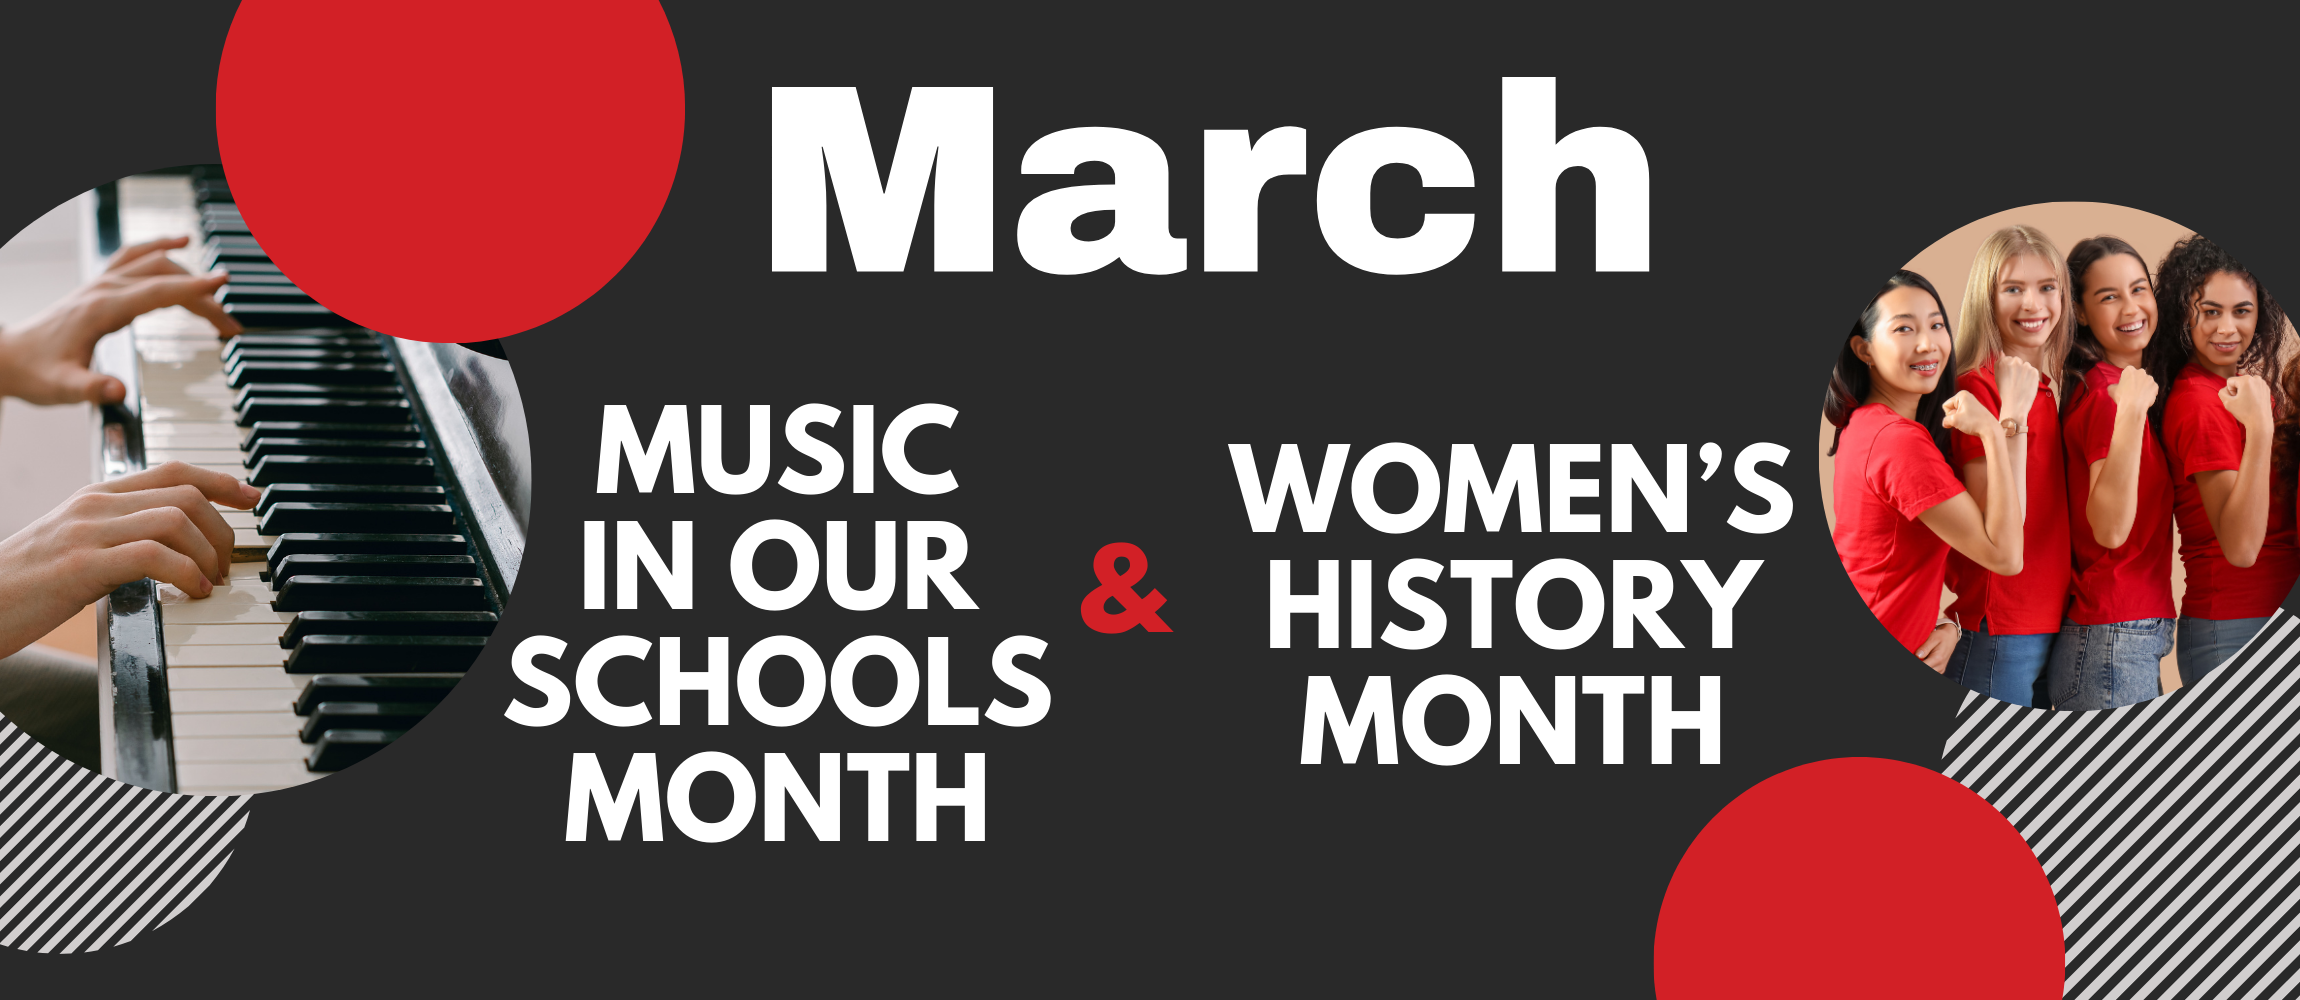 March is Music in Our Schools Month and Women's History Month